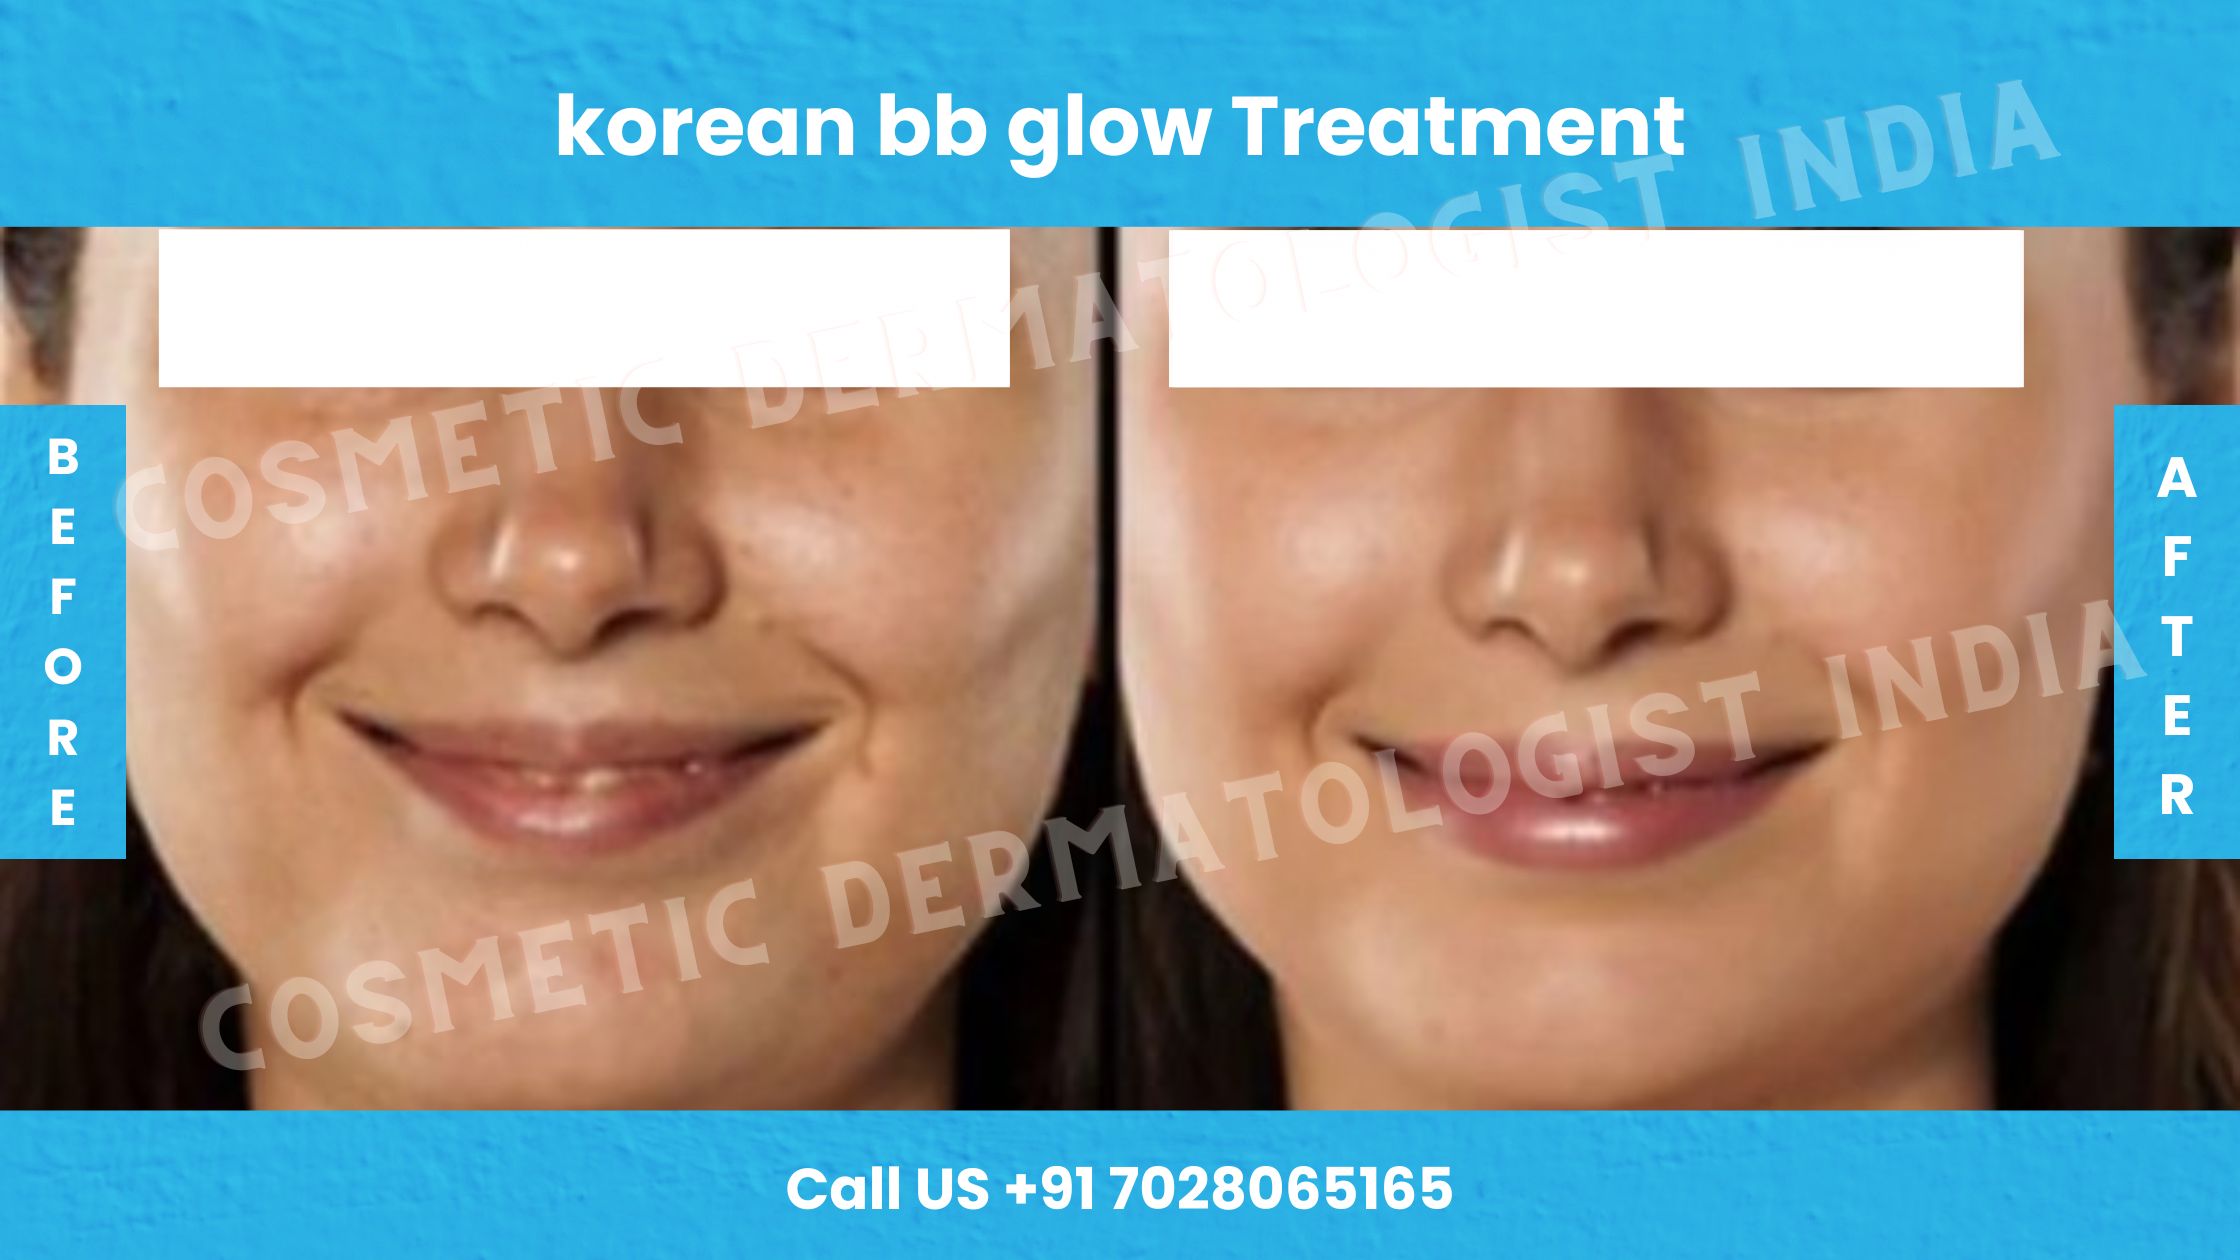 Before and After images of Korean BB Glow Treatment